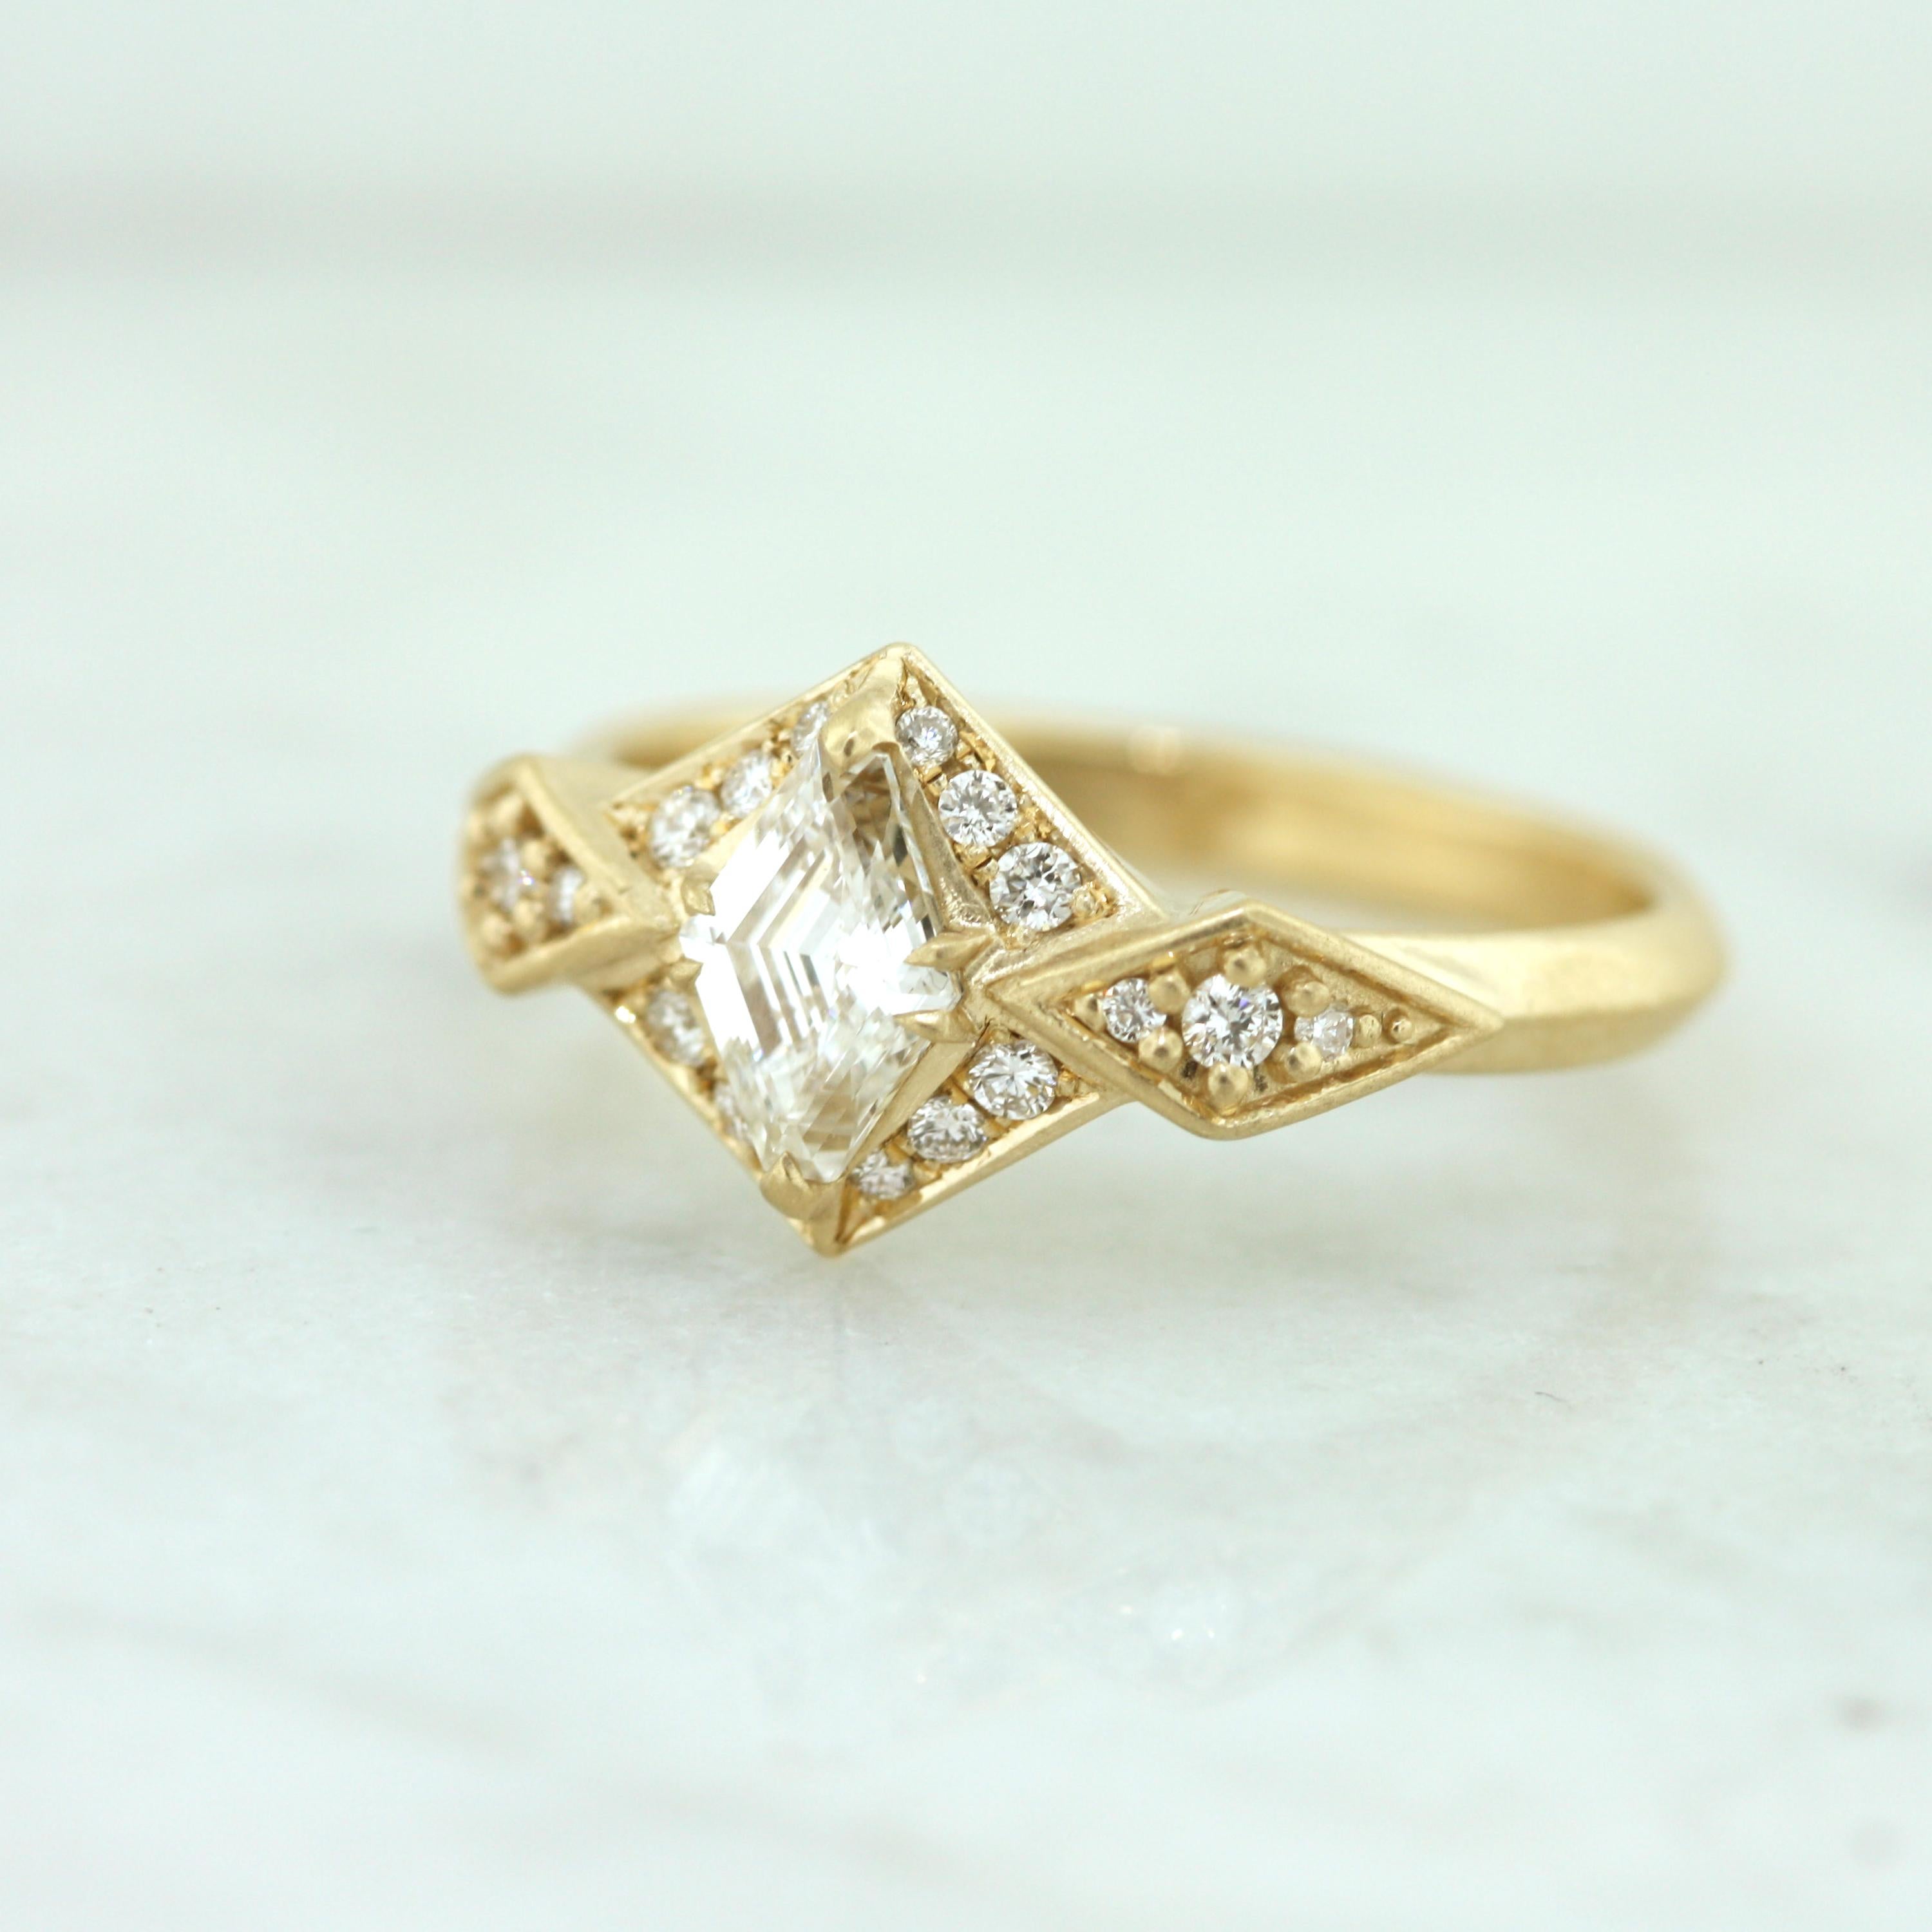 Geometric Art Deco inspired ring with a .75 carats of Canadian diamonds set in 100% recycled 14K yellow gold. Perfect for the modern lady who likes traditional materials but loves contemporary design.

- One of a kind
- Finger size 6.25
- Available